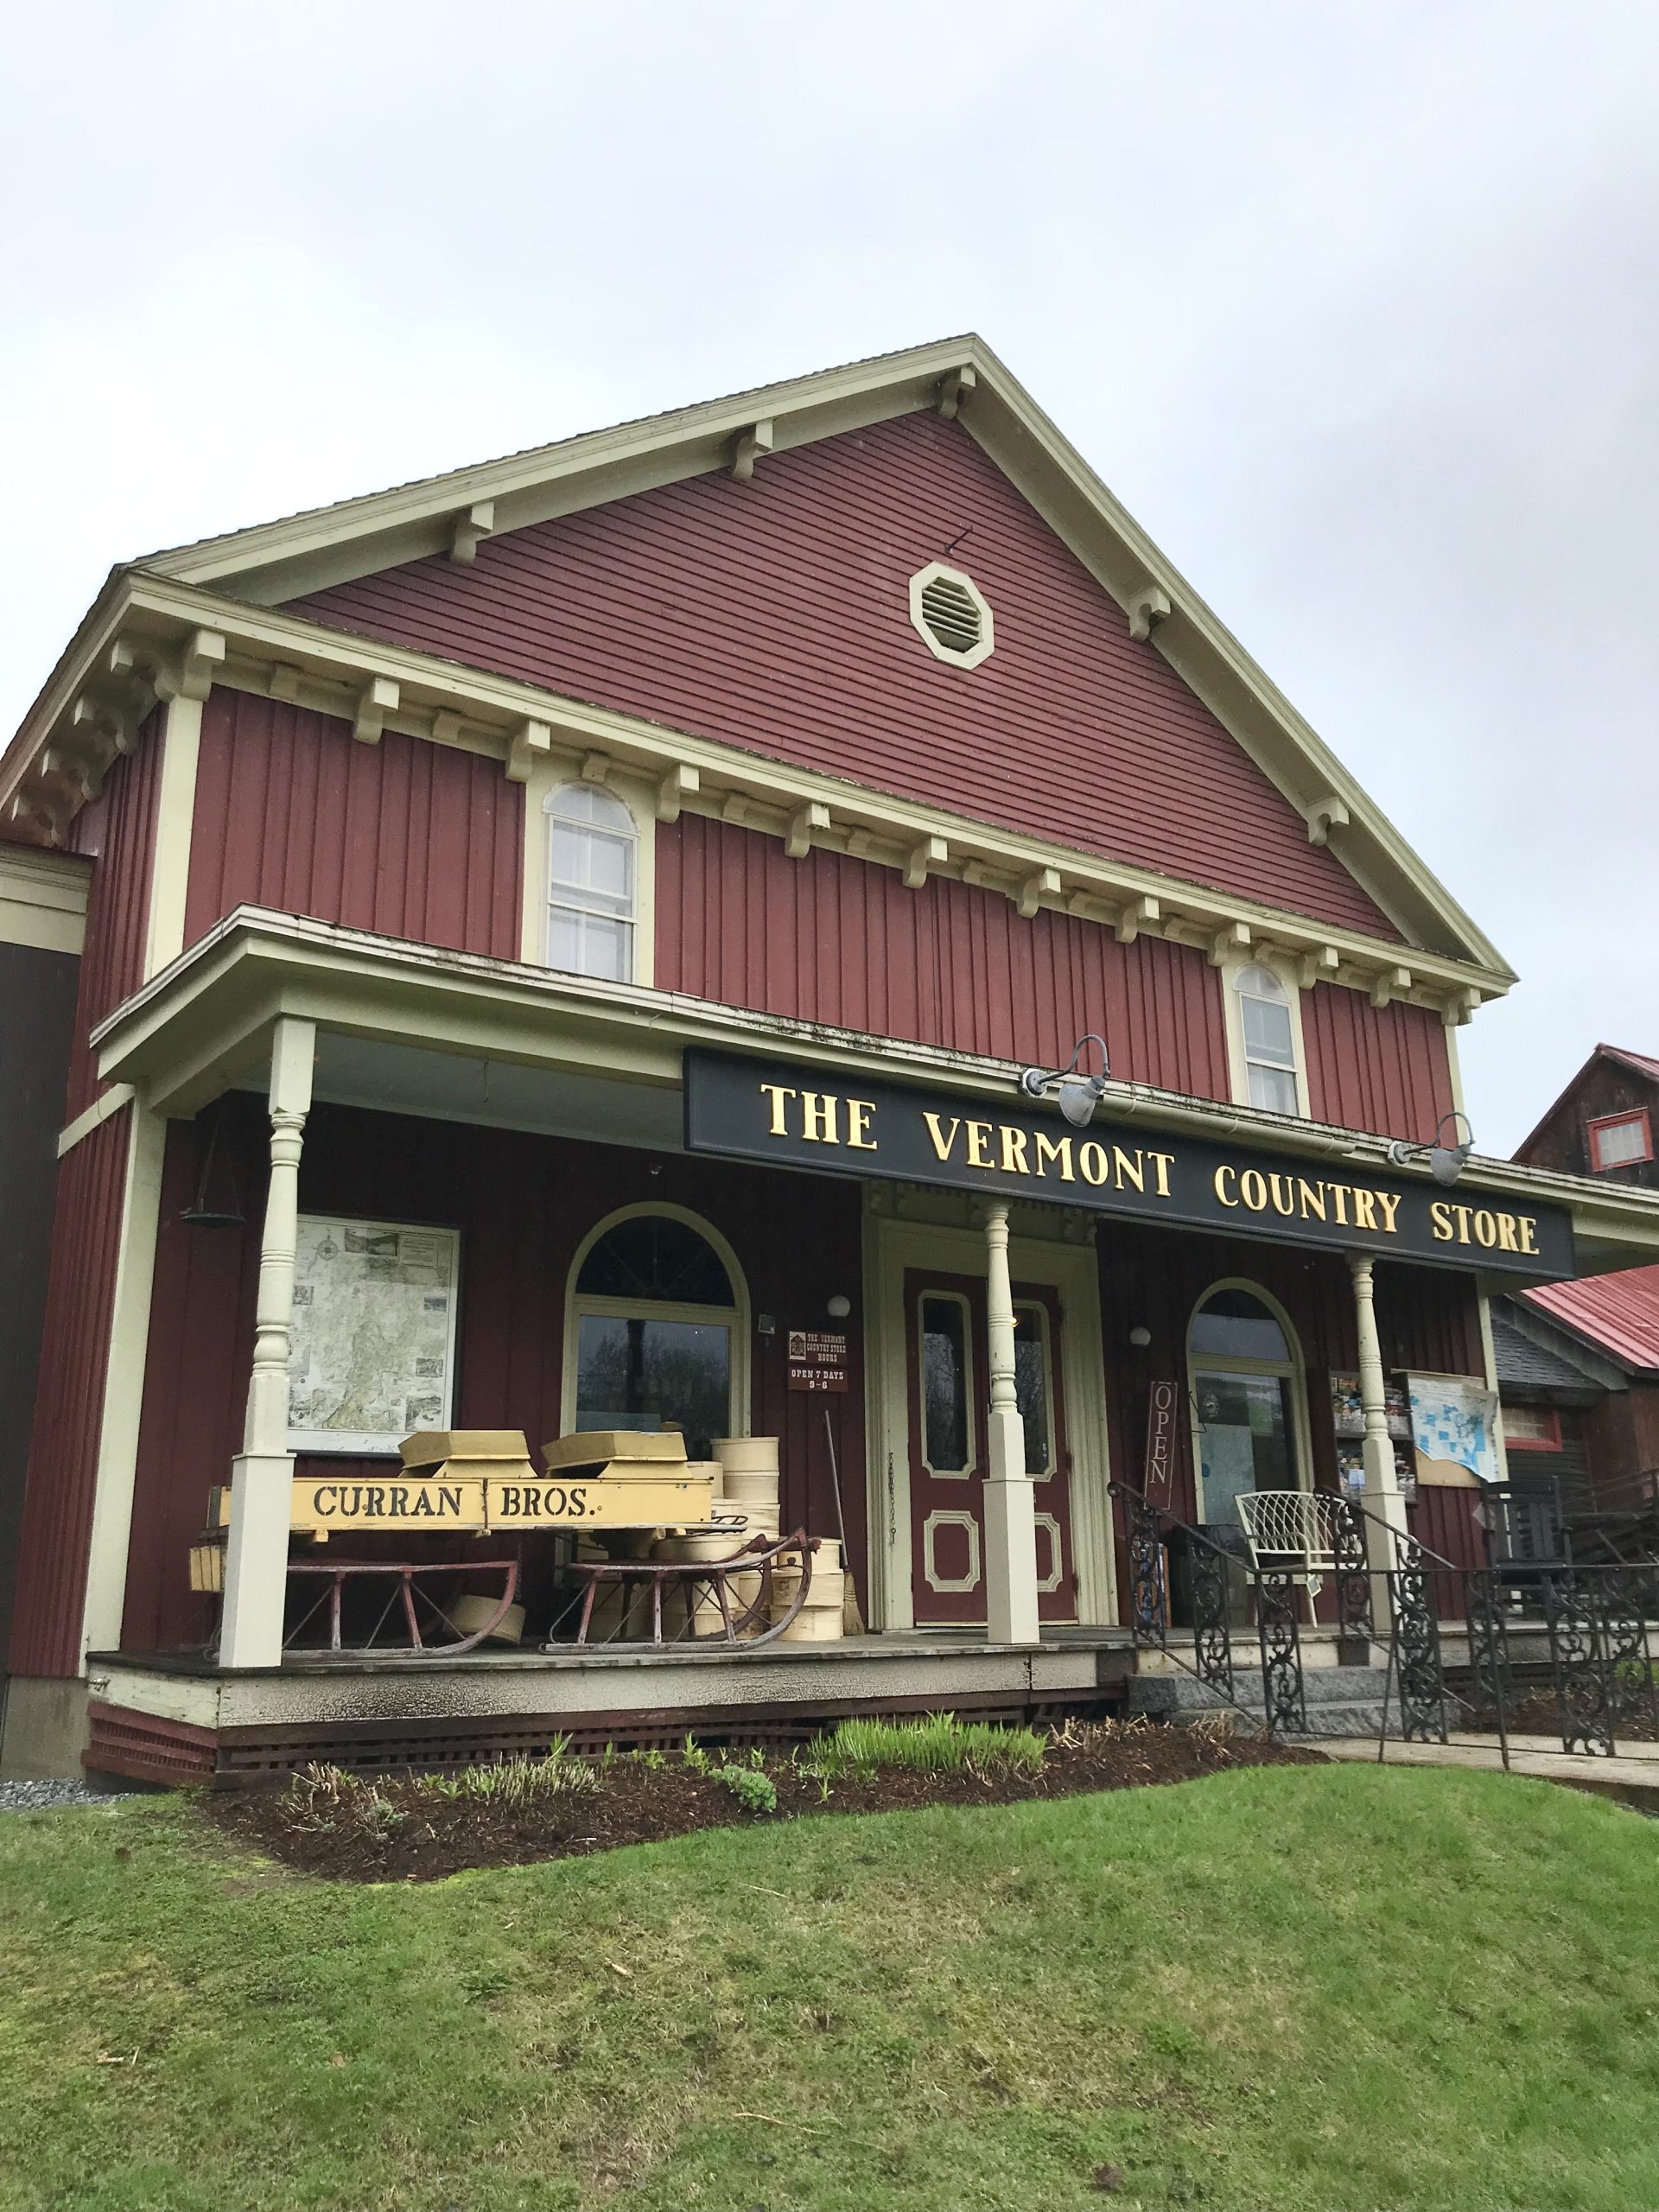 The Vermont Country Store Reviews - 63 Reviews of Vermontcountrystore.com